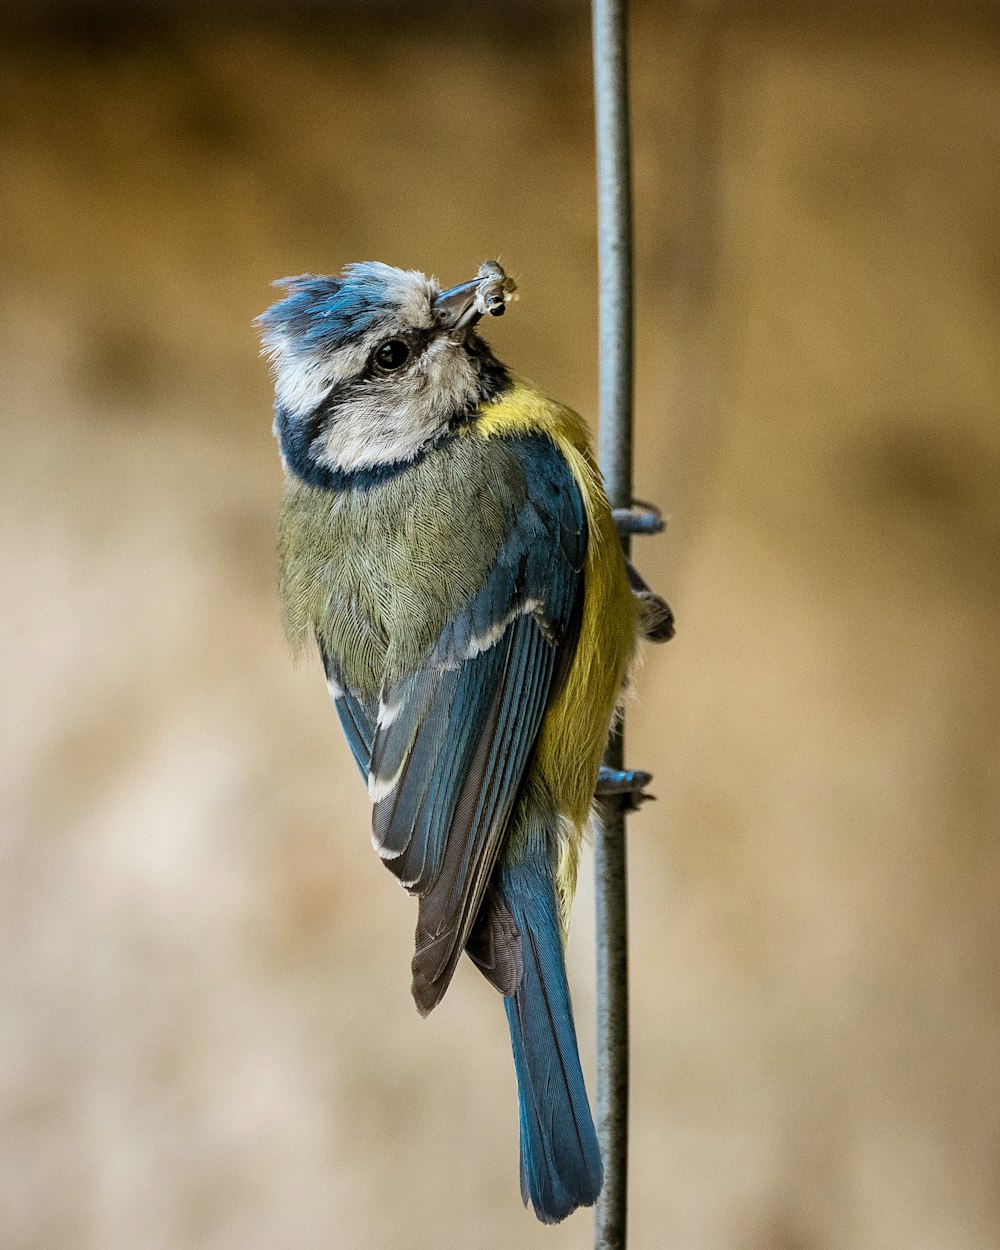 a blue and yellow bird sitting on a branch